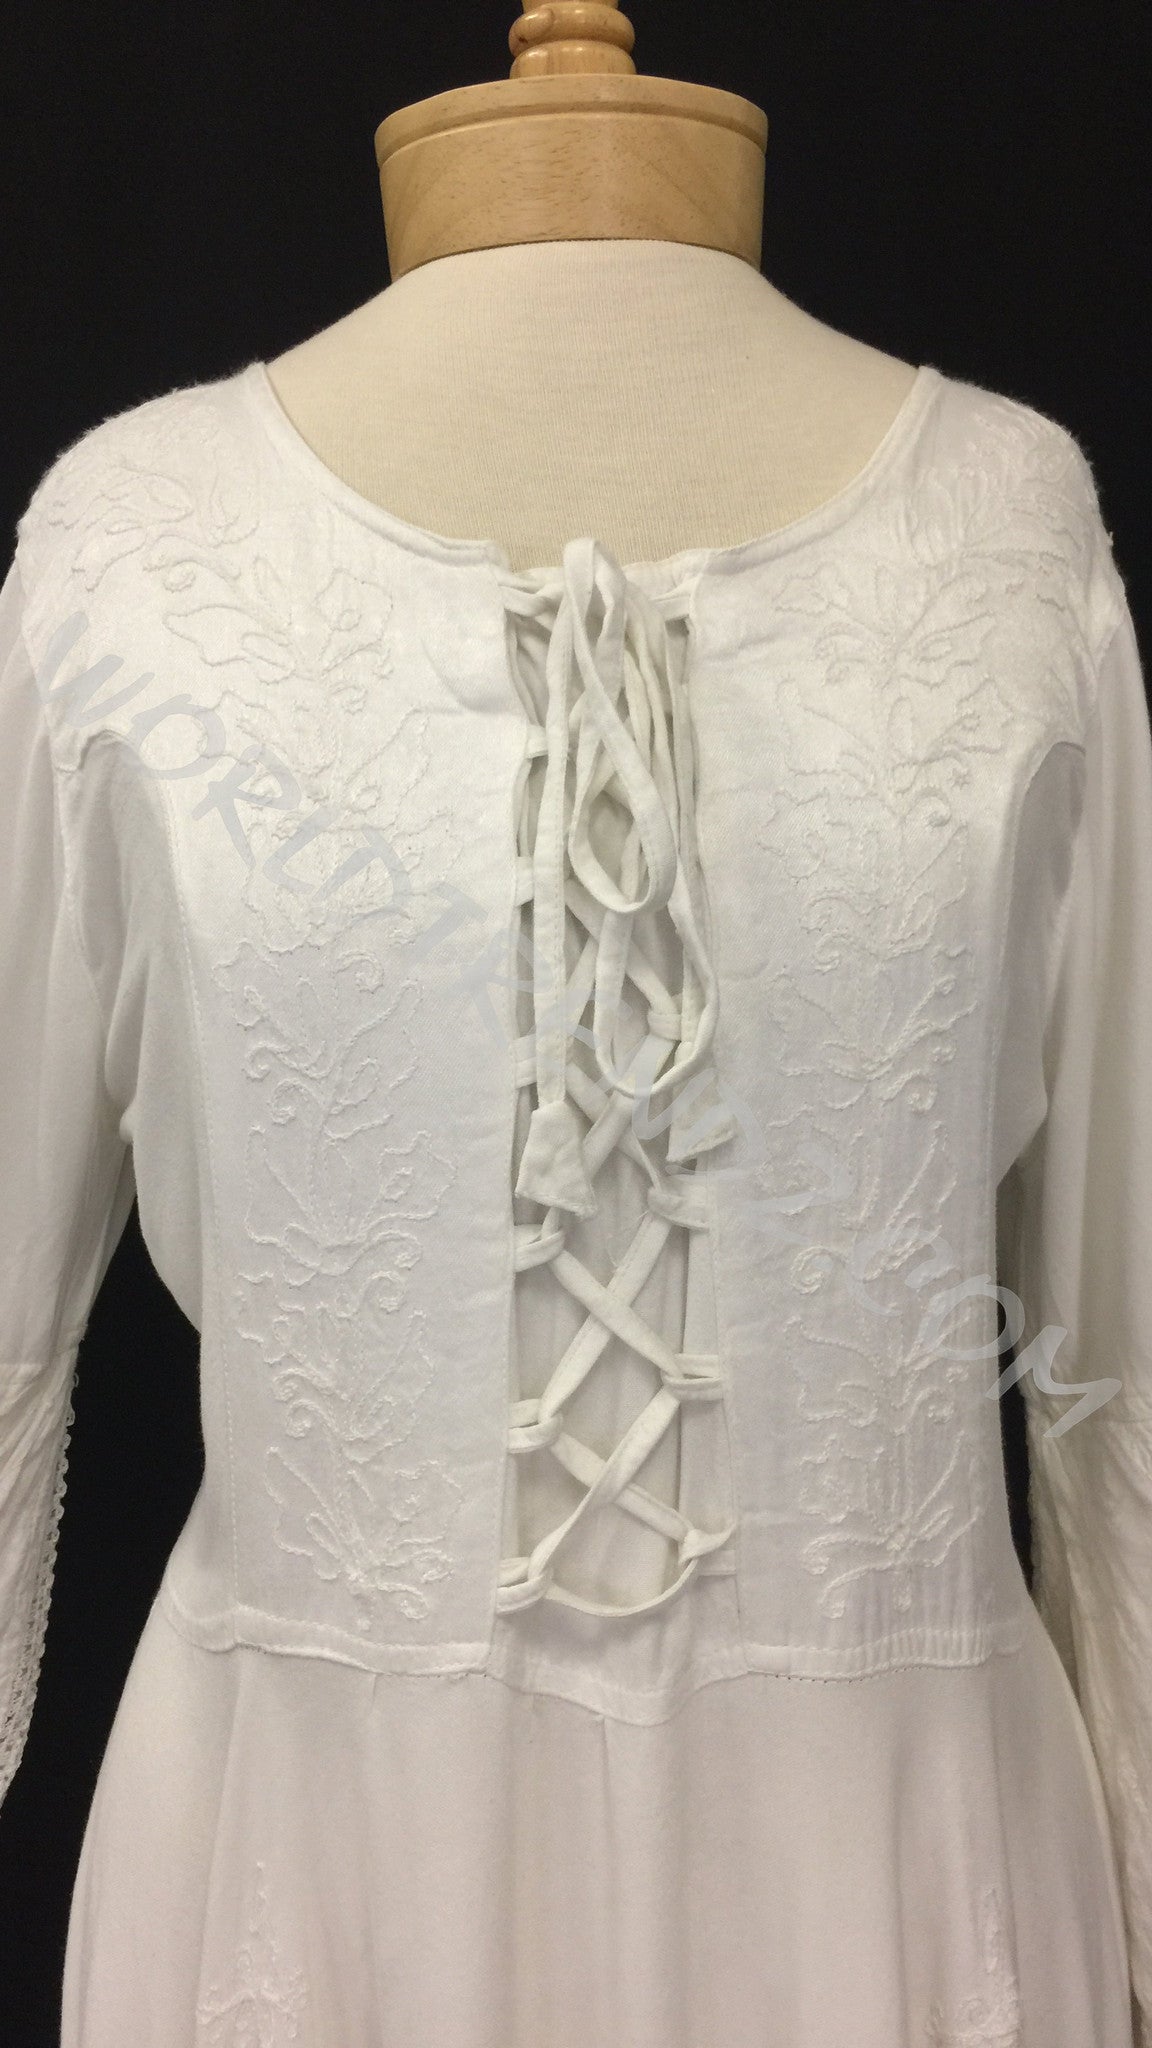 LACE-UP MEDIEVAL STYLE DRESS MAXI LENGTH WHITE FRONT DETAIL